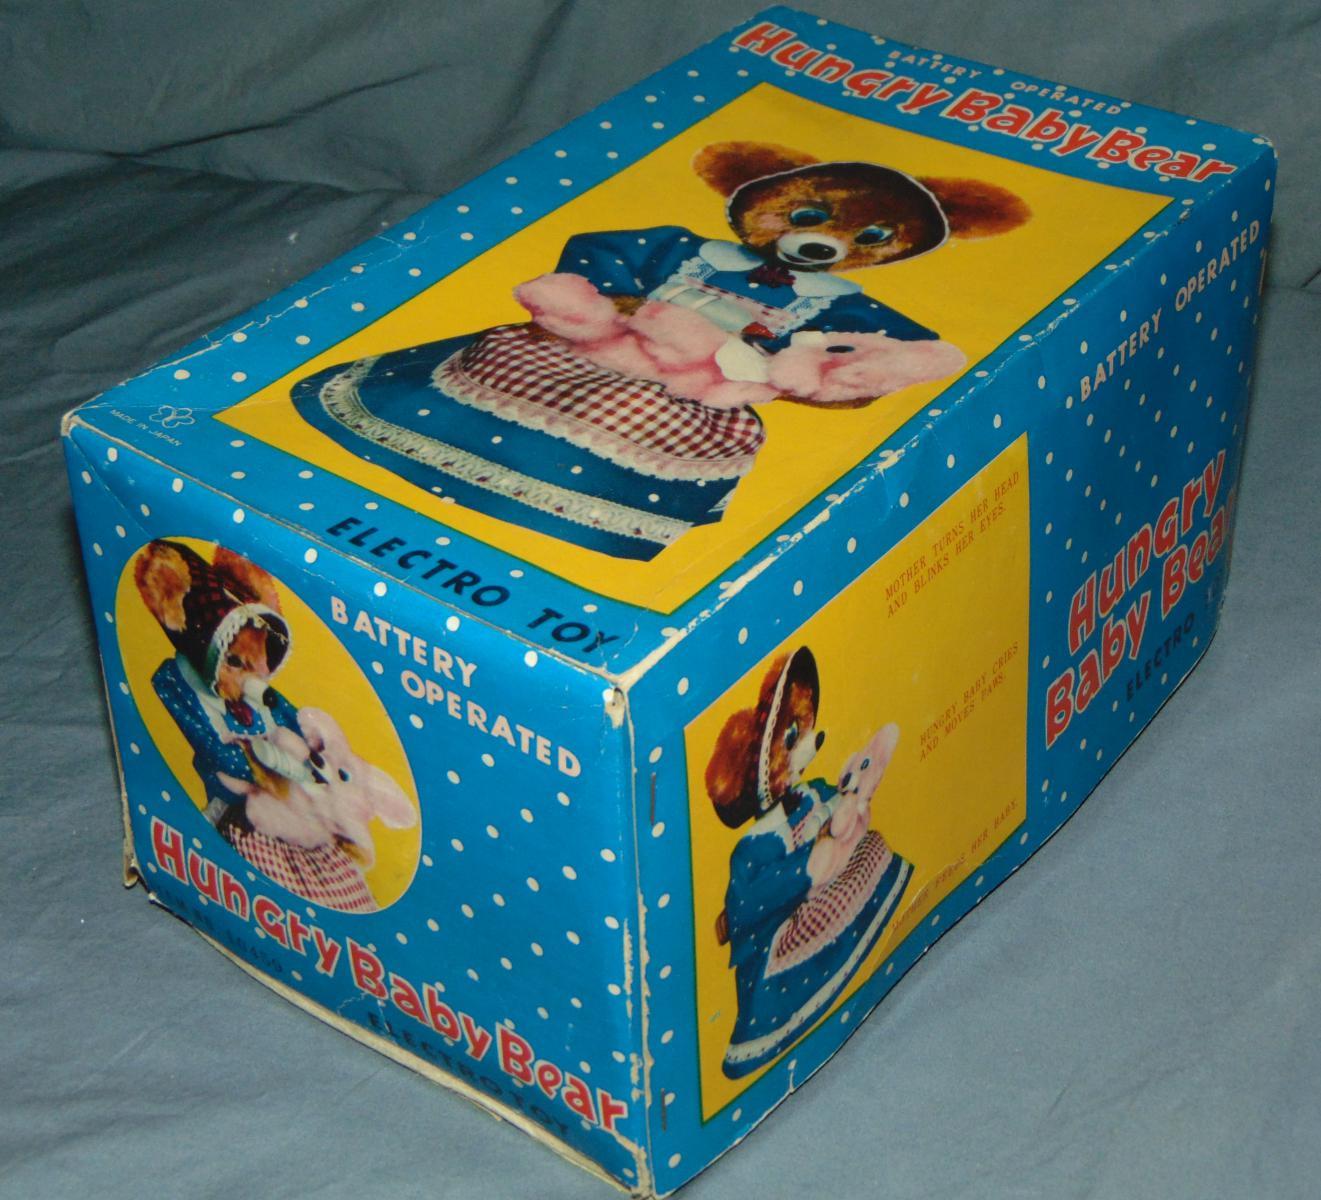 Battery Operated Hungry Baby Bear Boxed.